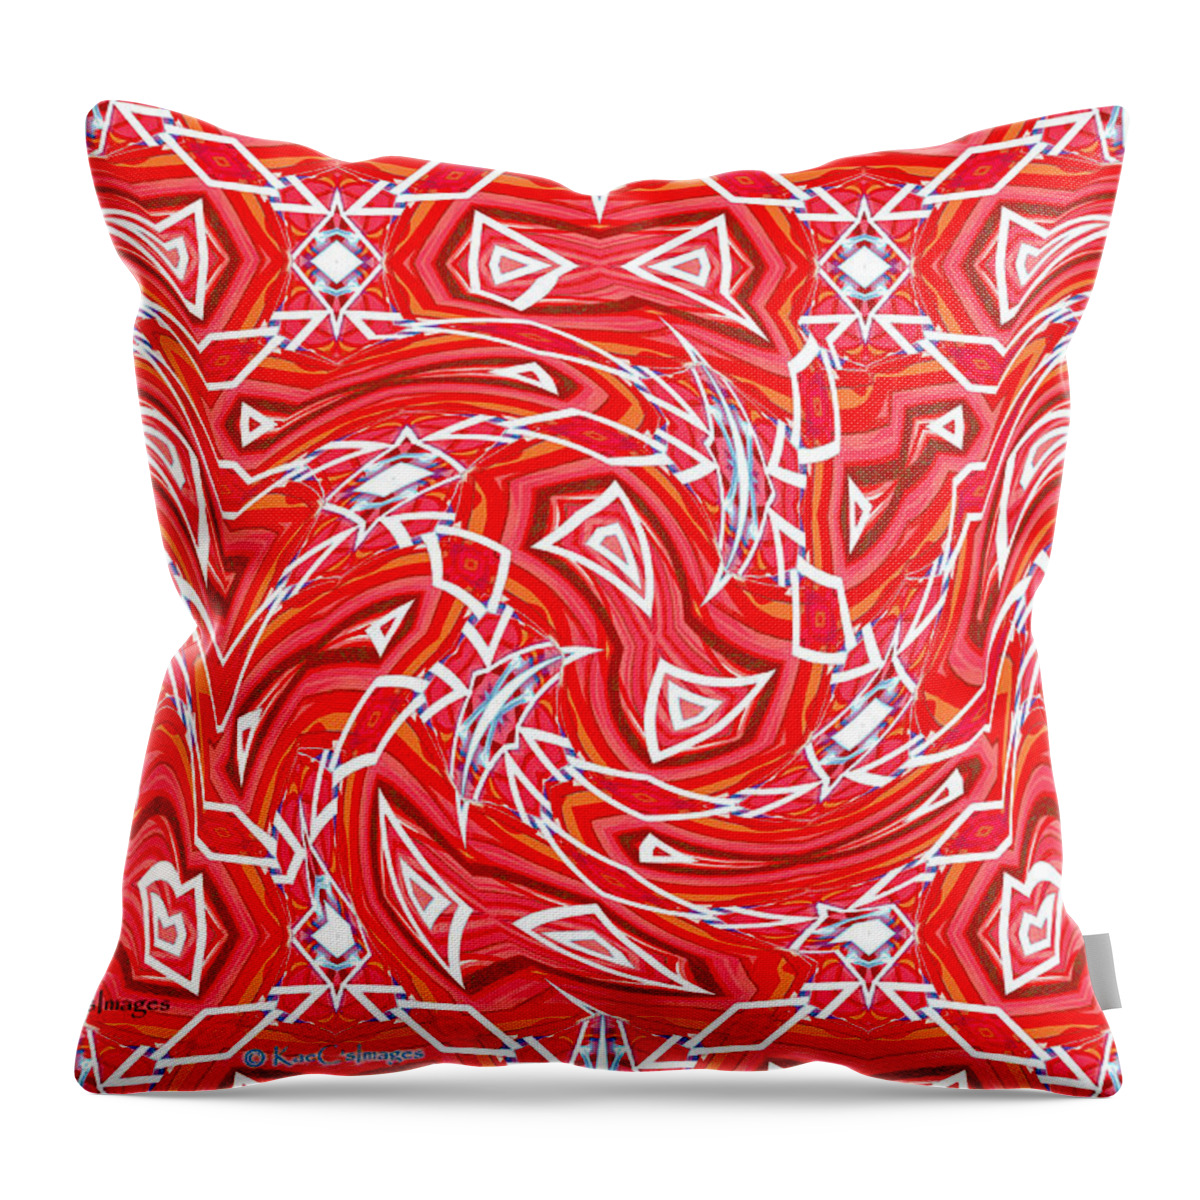 Abstract Throw Pillow featuring the digital art Abstract 1010 by Kae Cheatham